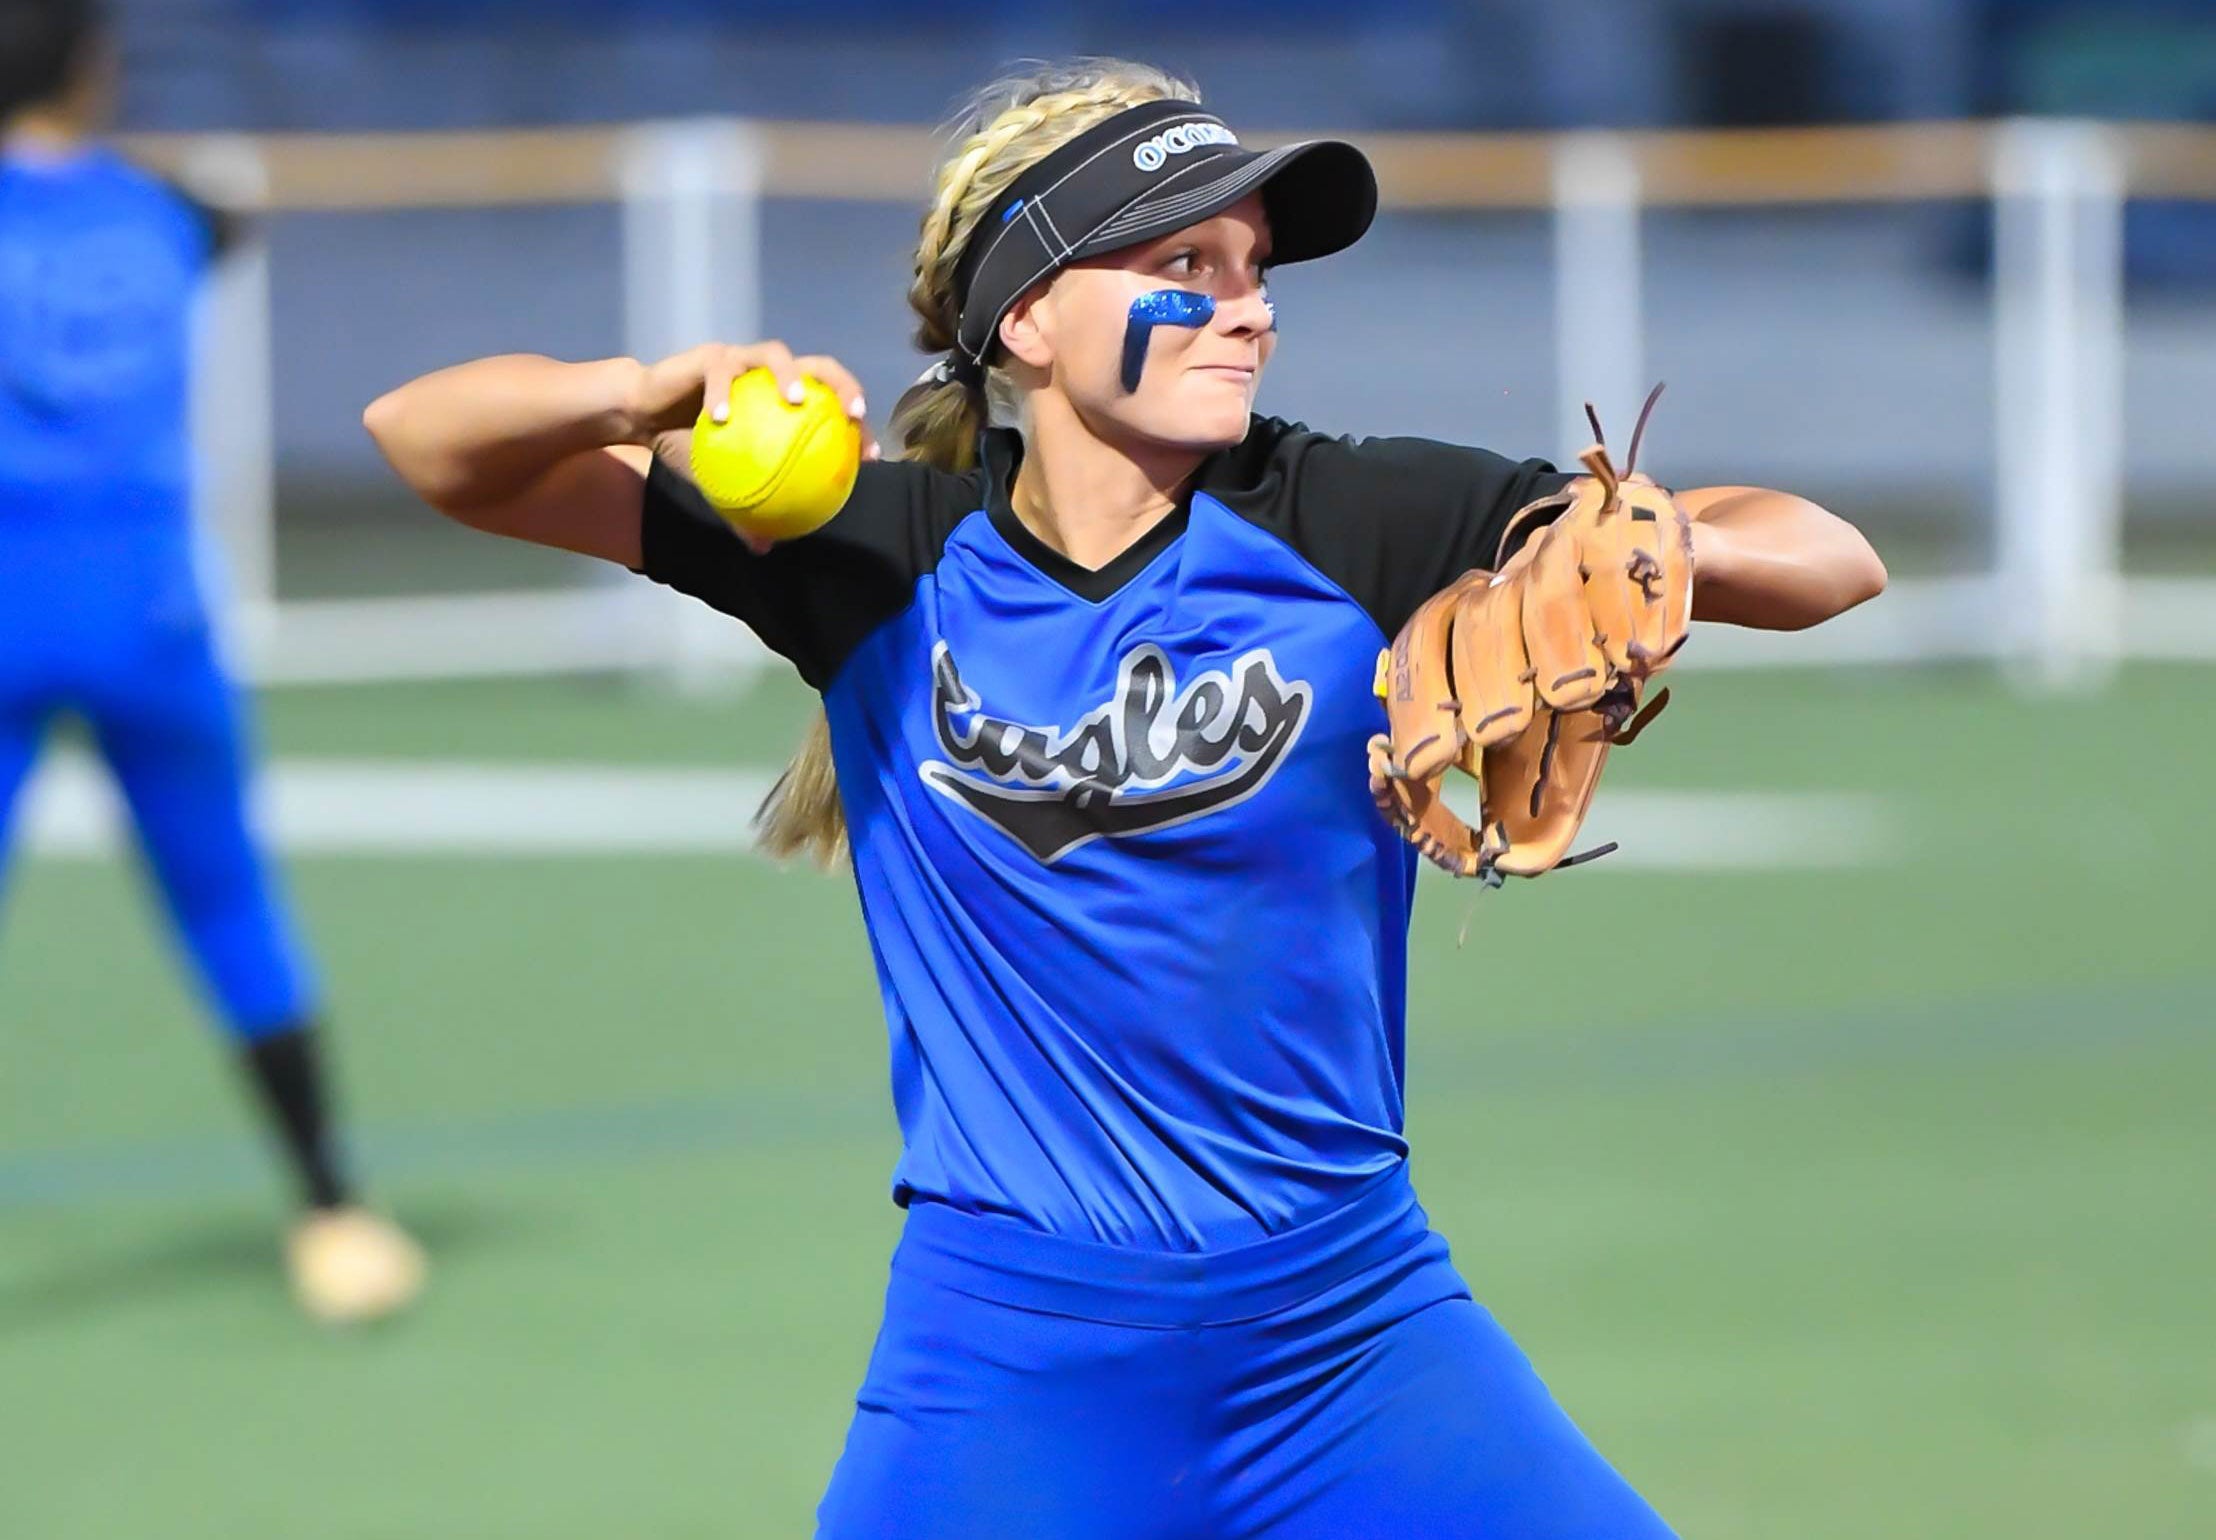 Softball standout Rylee Holtorf of O'Connor was our choice for the top female athlete in the state of Arizona.